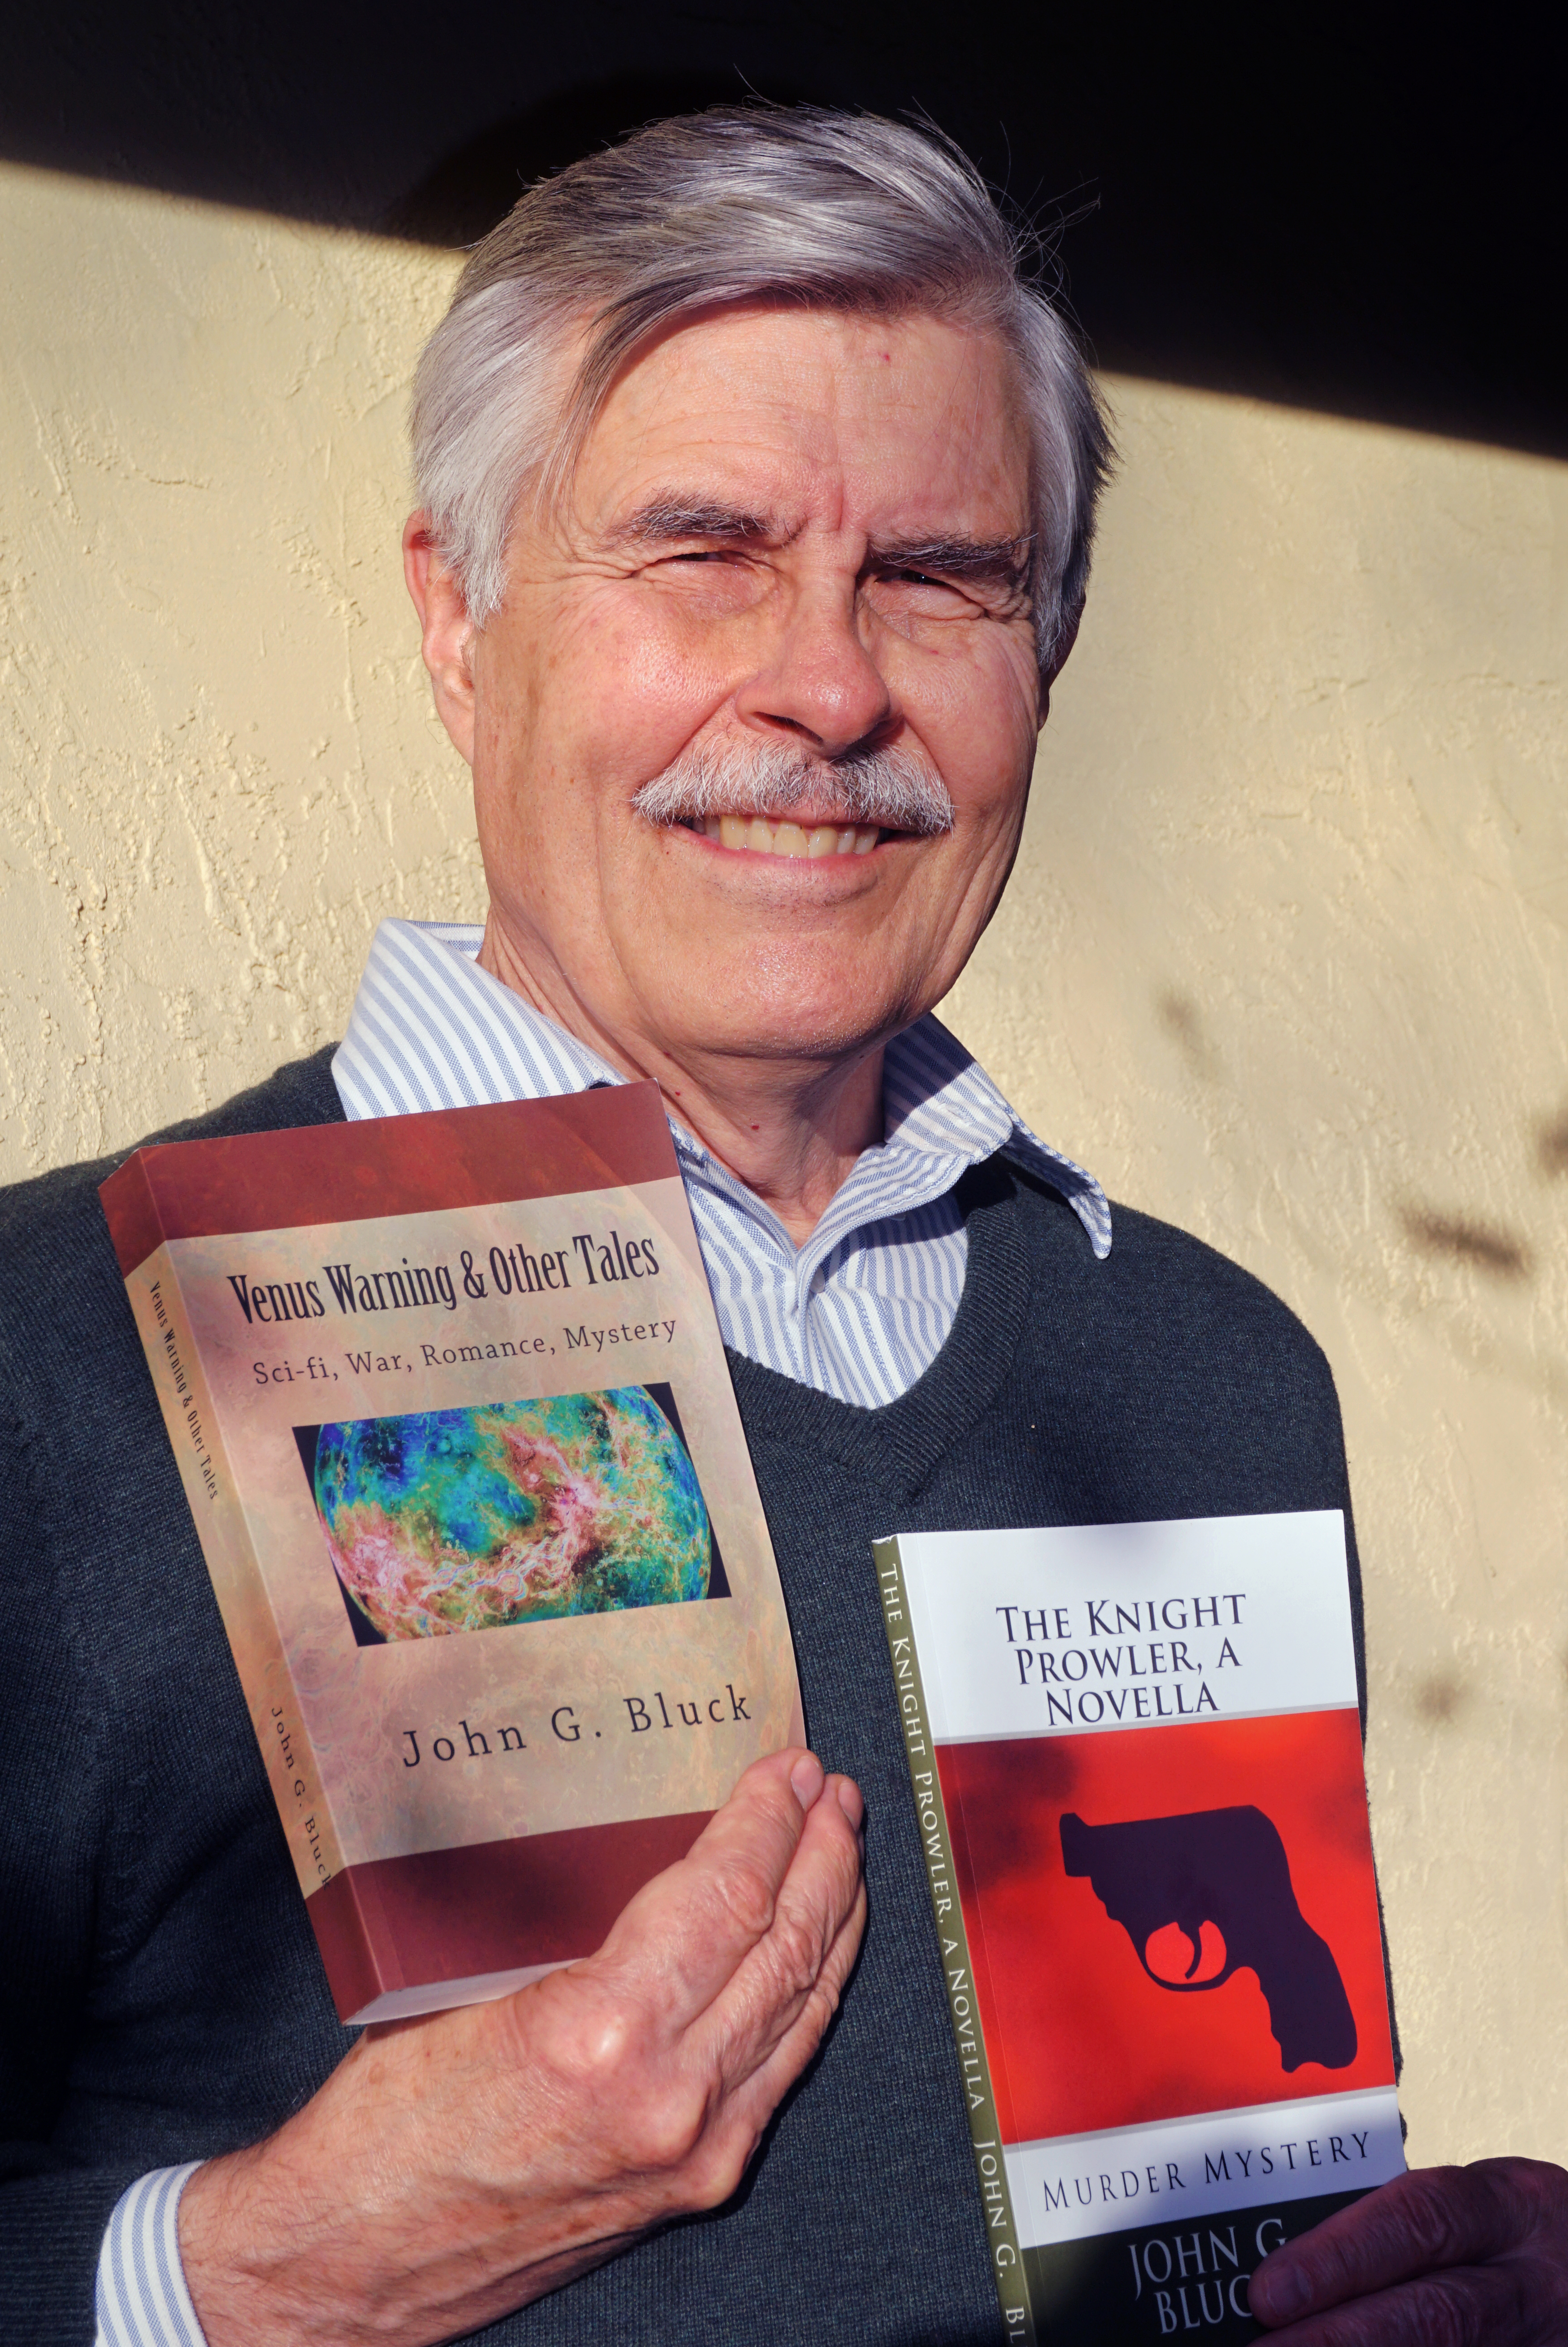 Author John G. Bluck with his book of short stories, "Venus Warning & Other Tales," and his first mystery, "The Knight Prowler, a novella."